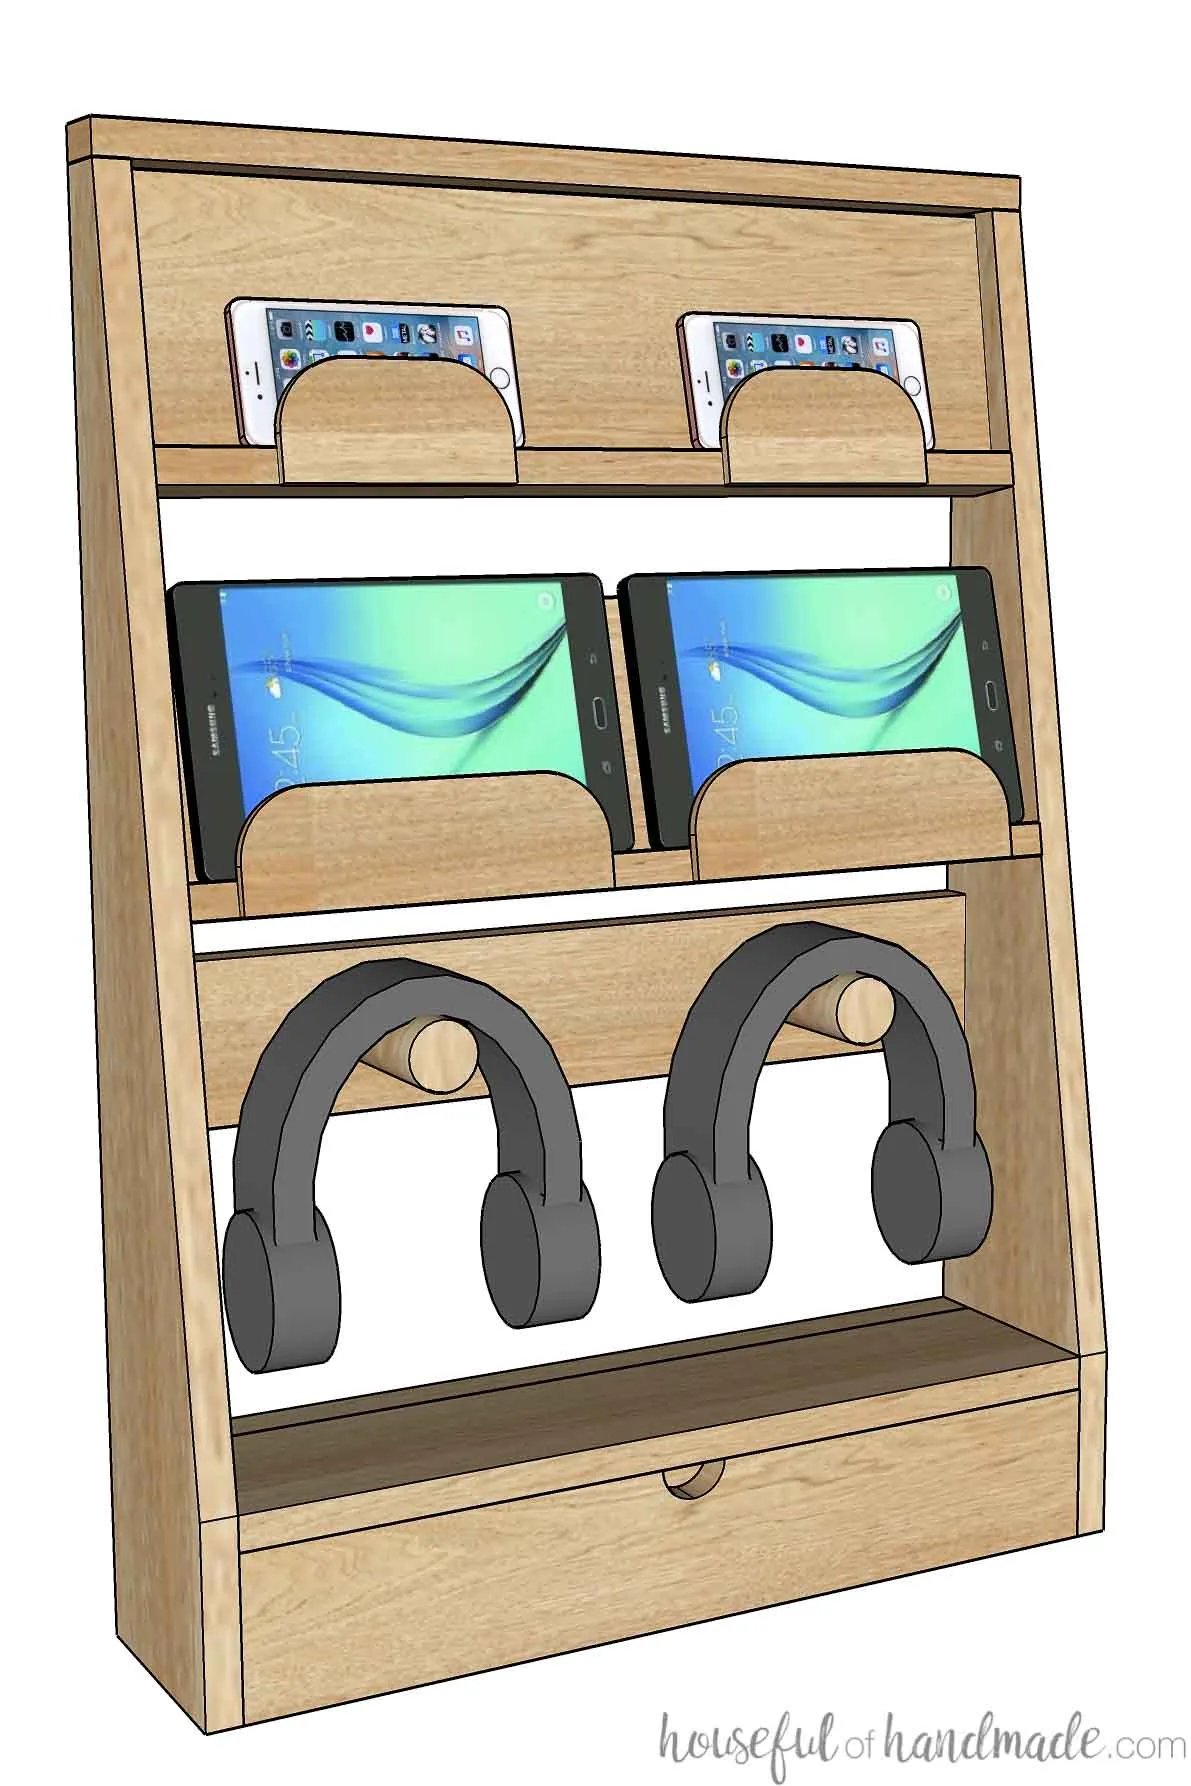 3D sketch of the DIY charging station that mounts on the wall.